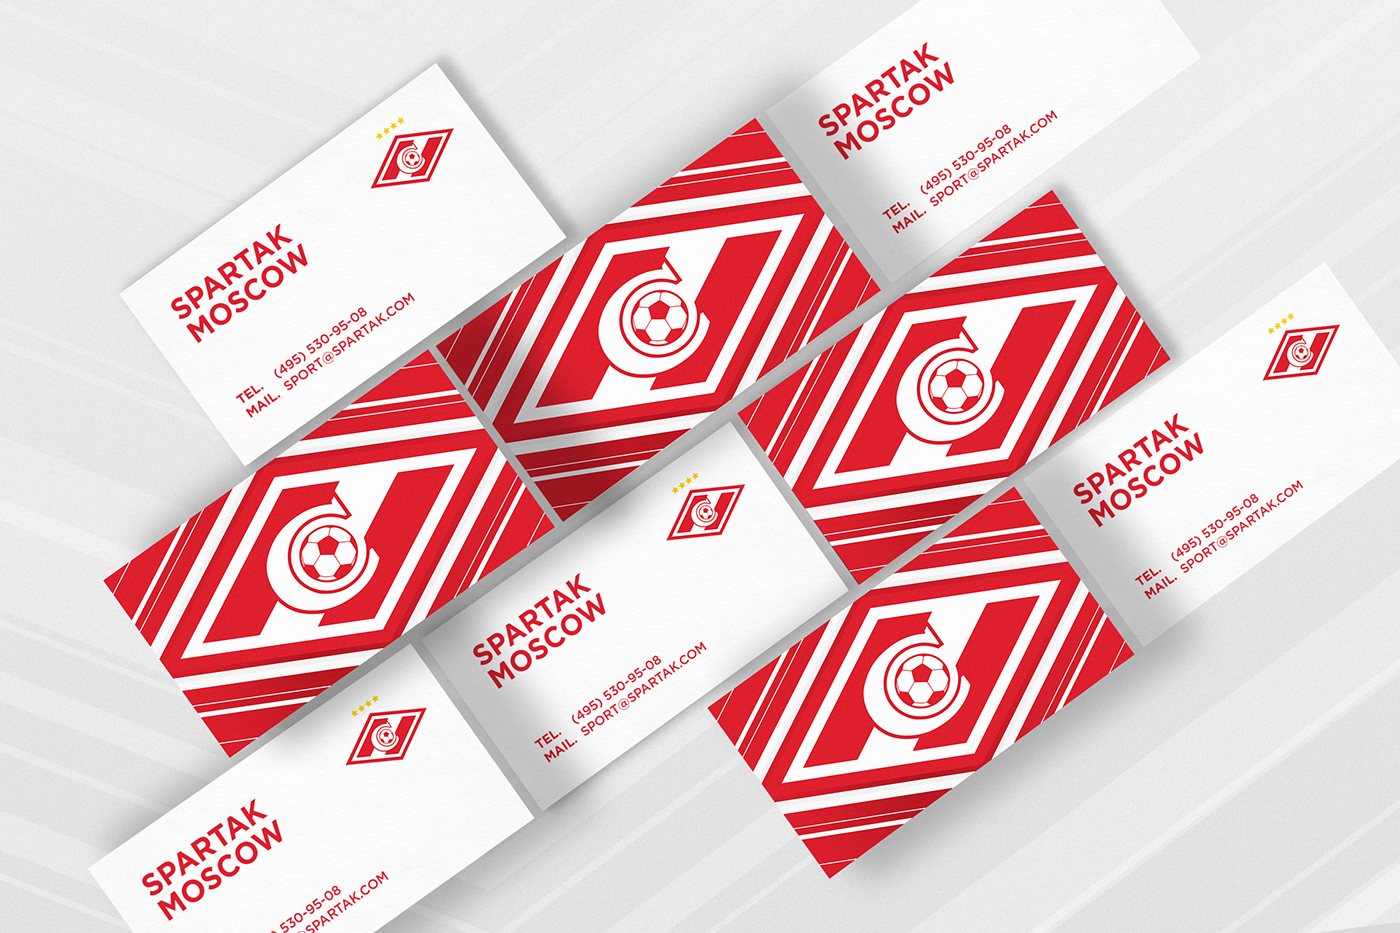 Spartak Moscow design red football branding  graphic key visual Players concept